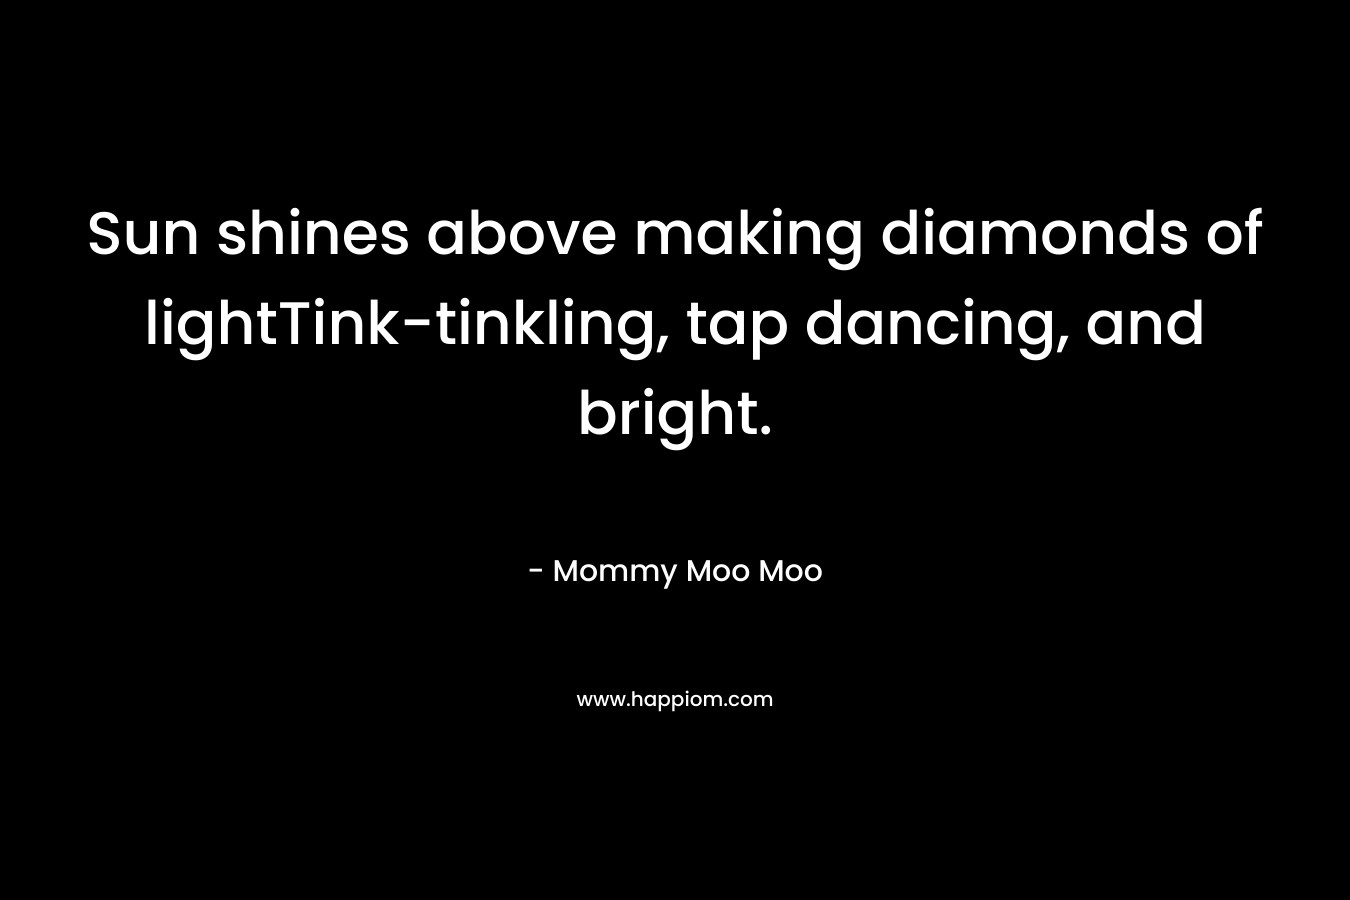 Sun shines above making diamonds of lightTink-tinkling, tap dancing, and bright. – Mommy Moo Moo